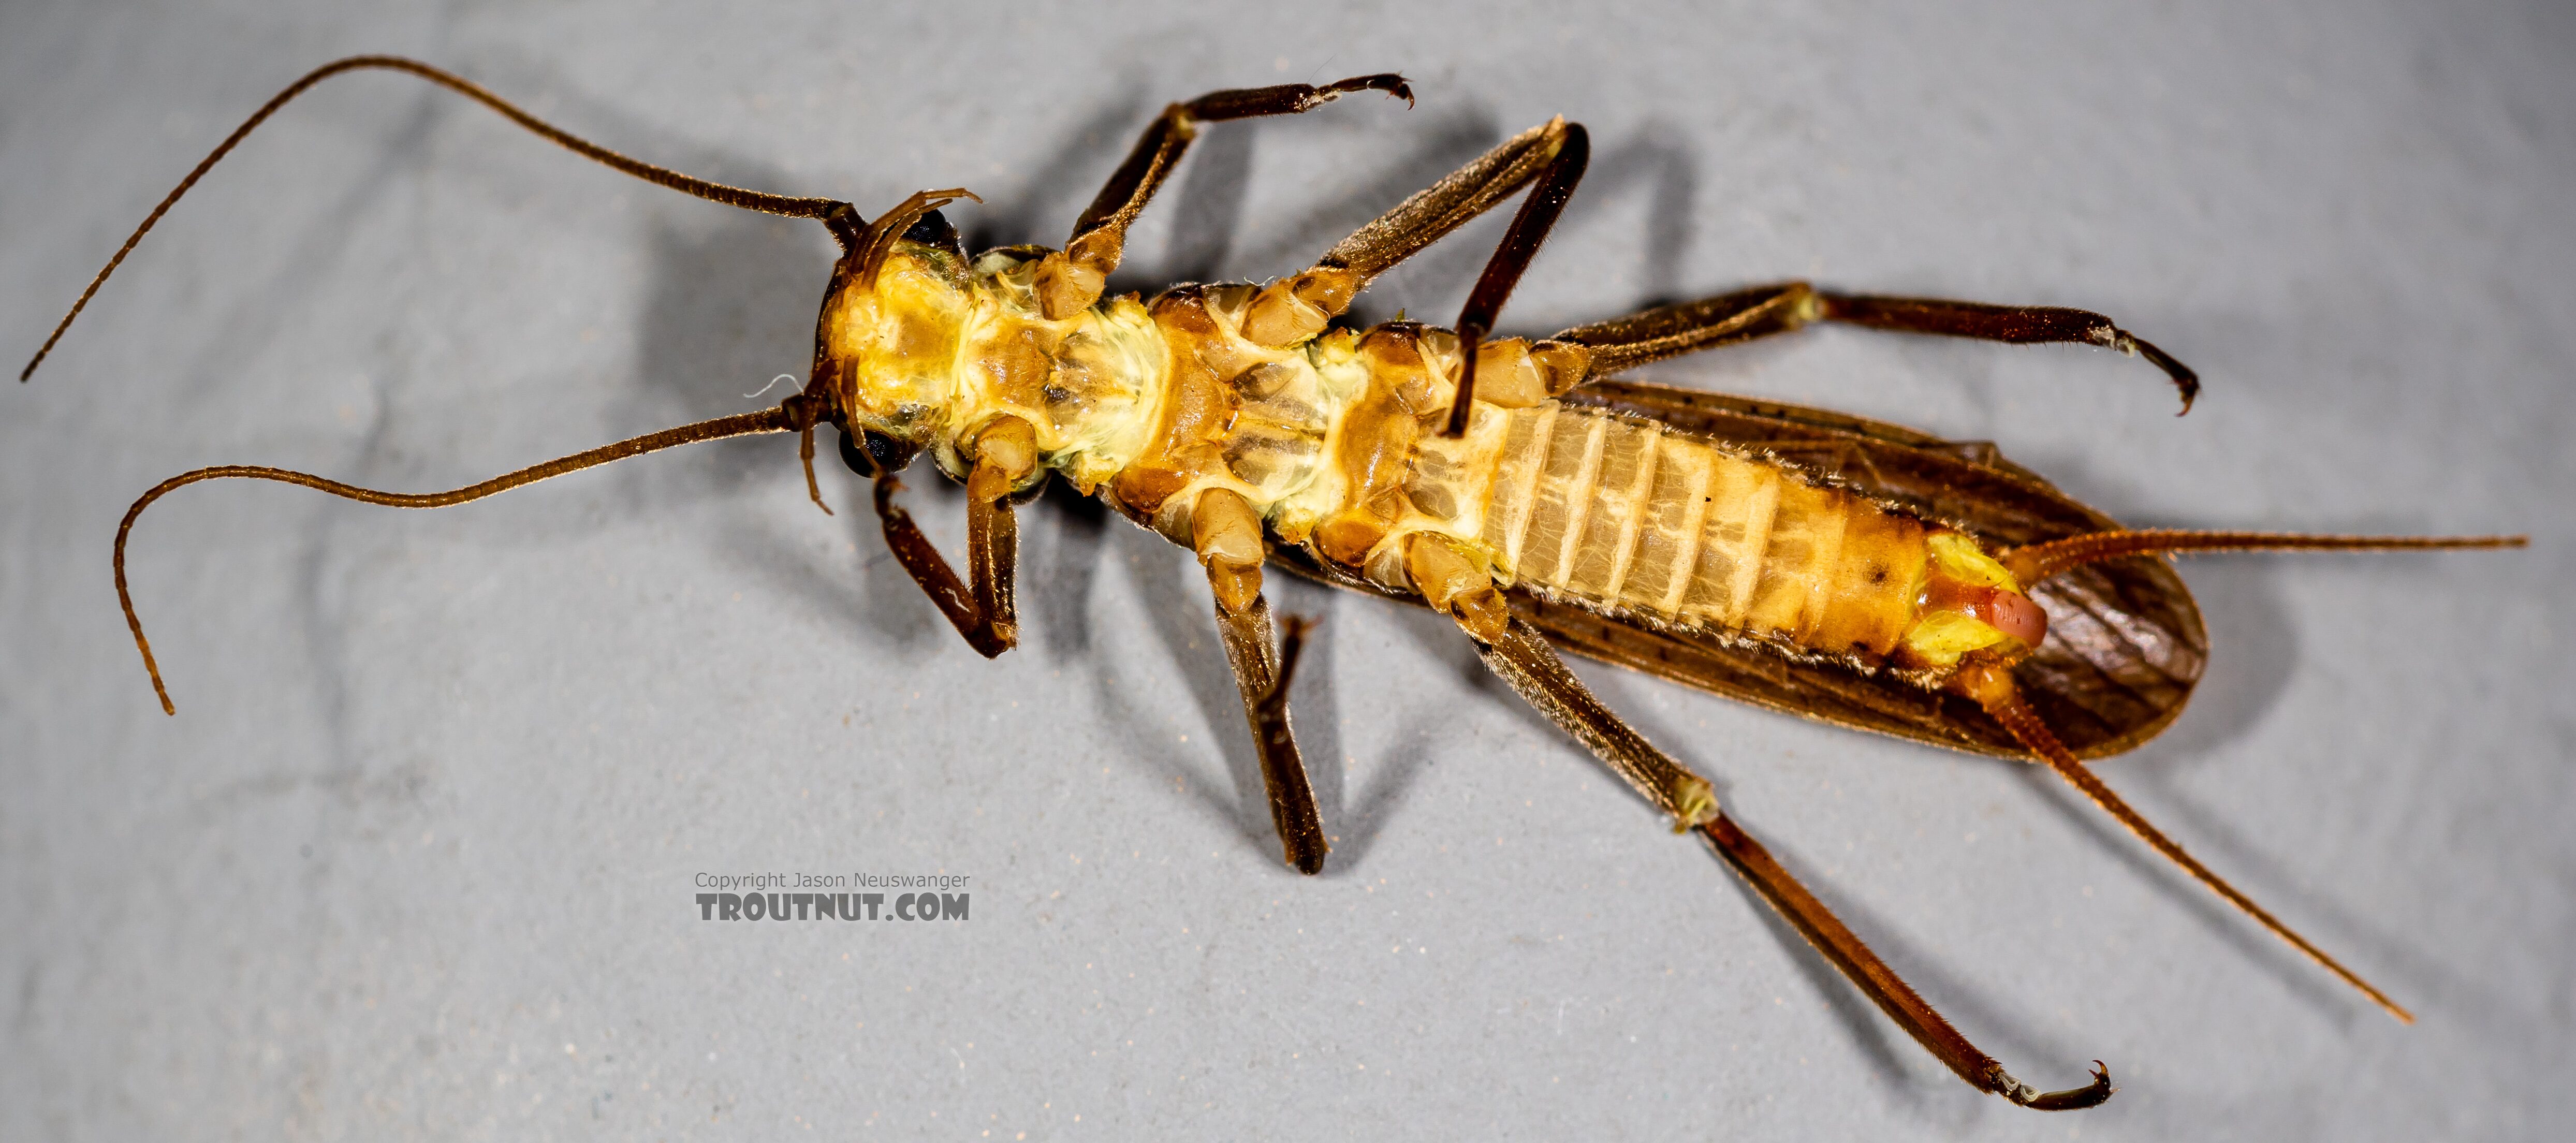 Male Doroneuria baumanni (Golden Stone) Stonefly Adult from the Foss River in Washington